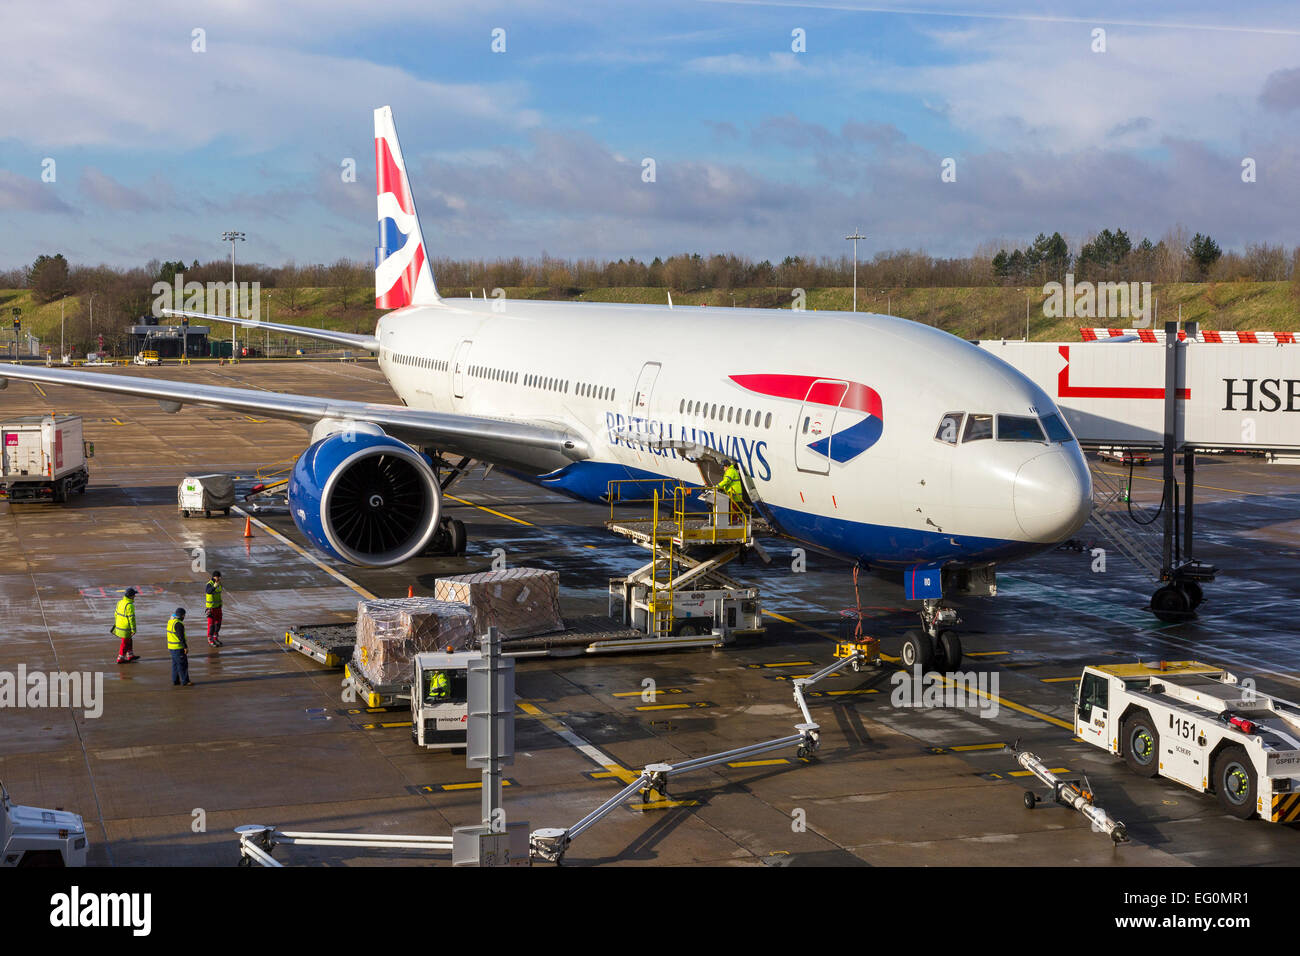 British Airways plane being loaded and unloaded at Gatwick airport, London, England, UK Stock Photo